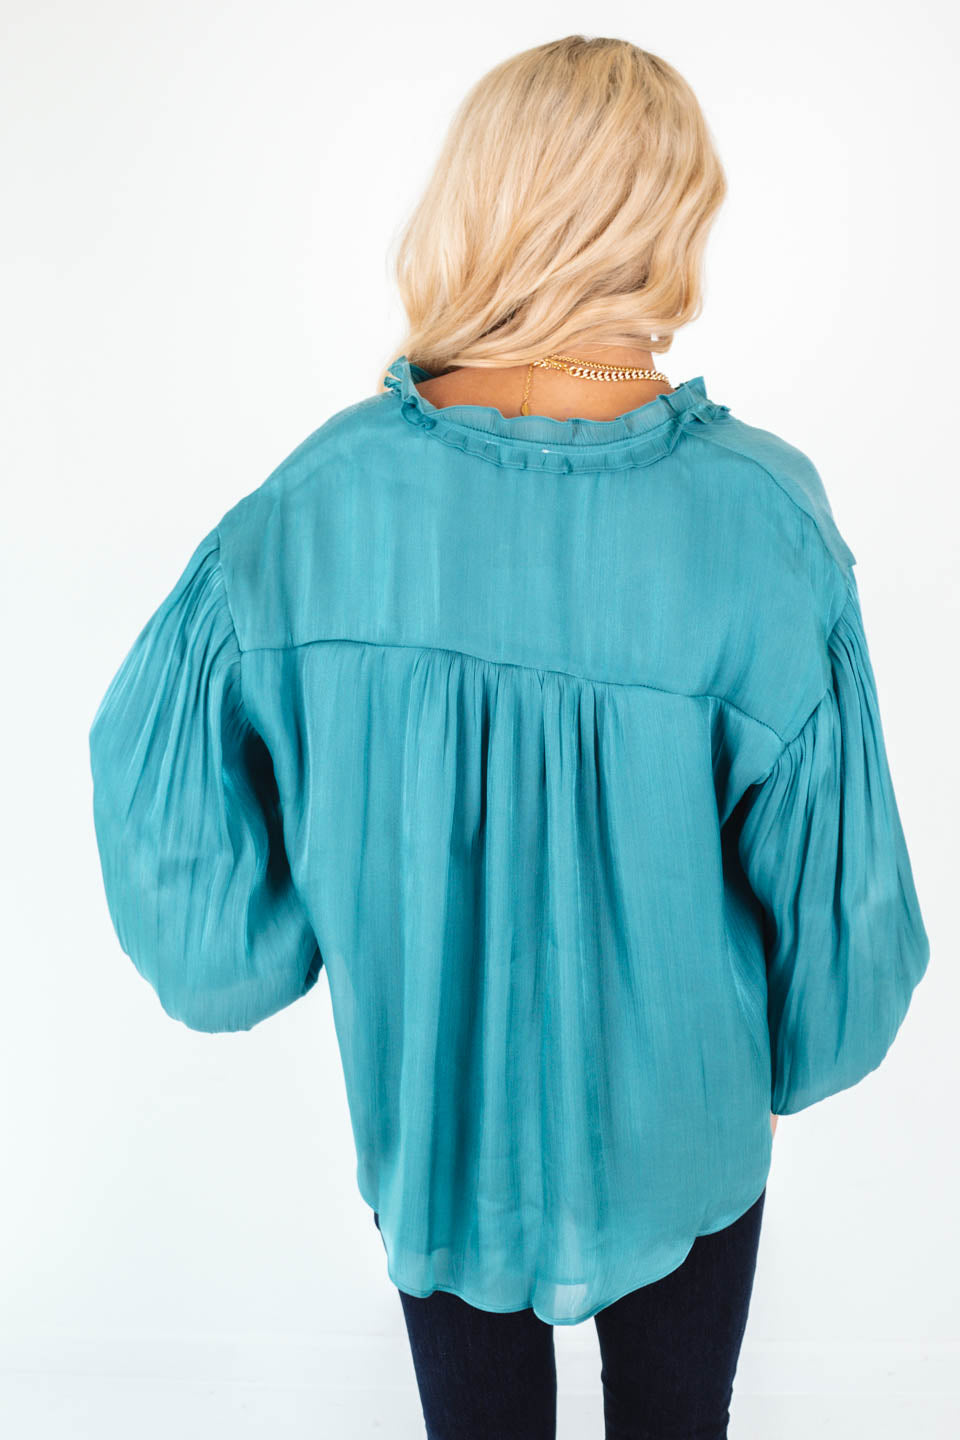 New Beginnings Top - Teal – The Impeccable Pig